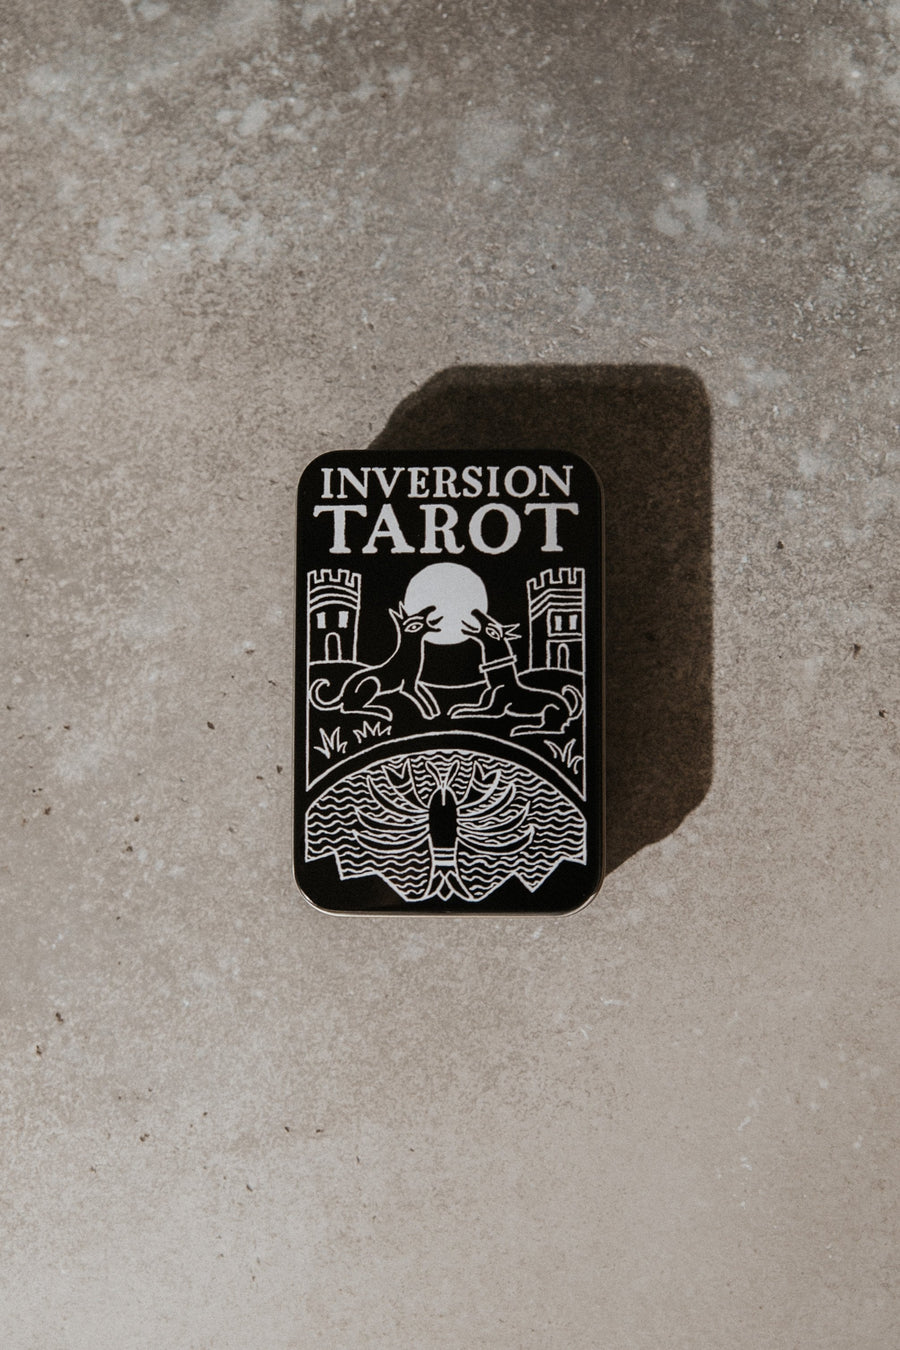 US Games System Objects Black / FINAL SALE Inversion Tarot Deck